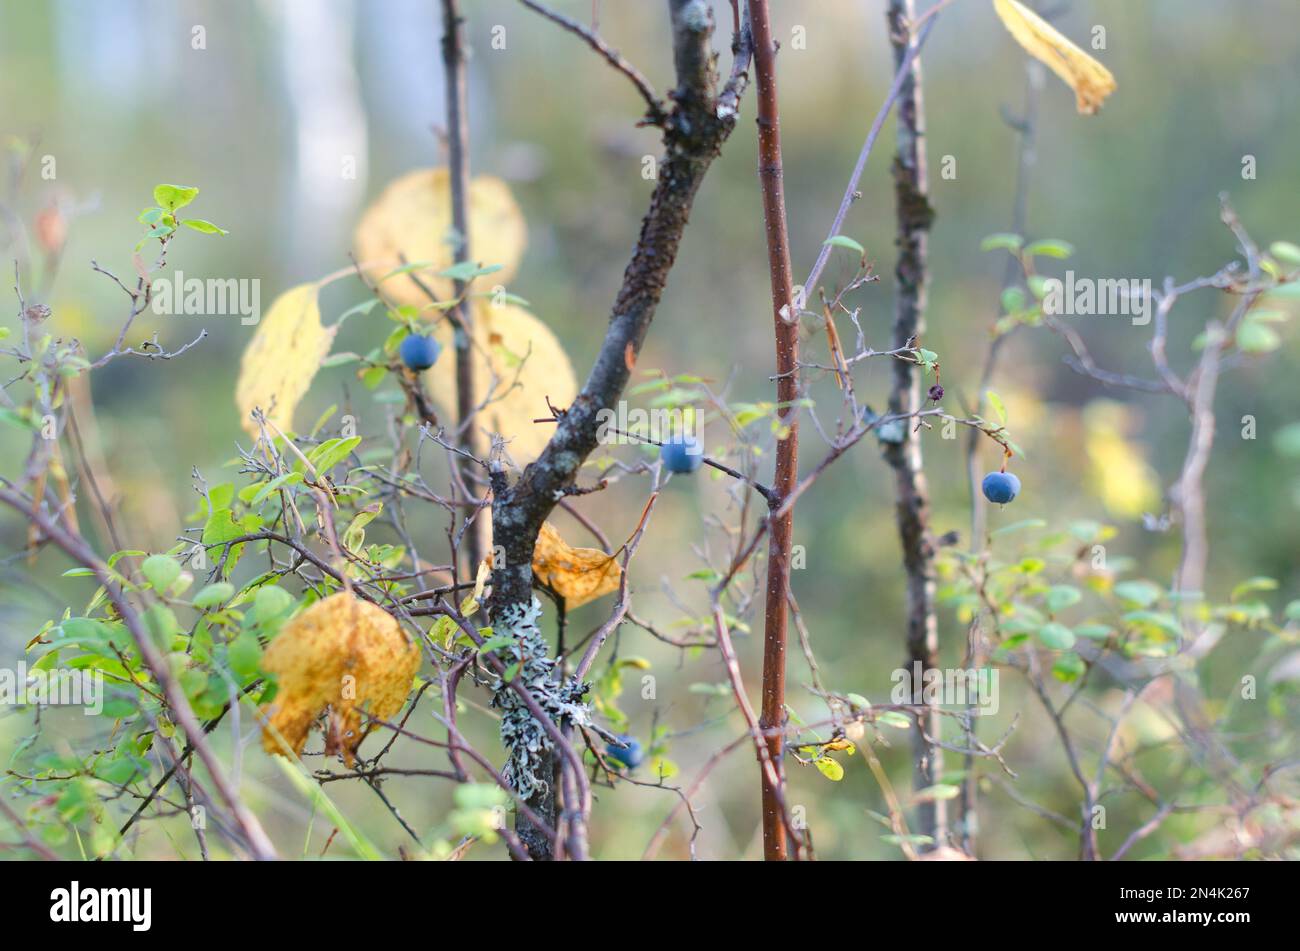 Blue juicy wild northern blueberry berries grow on a Bush in colorful vegetation with yellow leaves and mossy tree trunk in autumn. Stock Photo